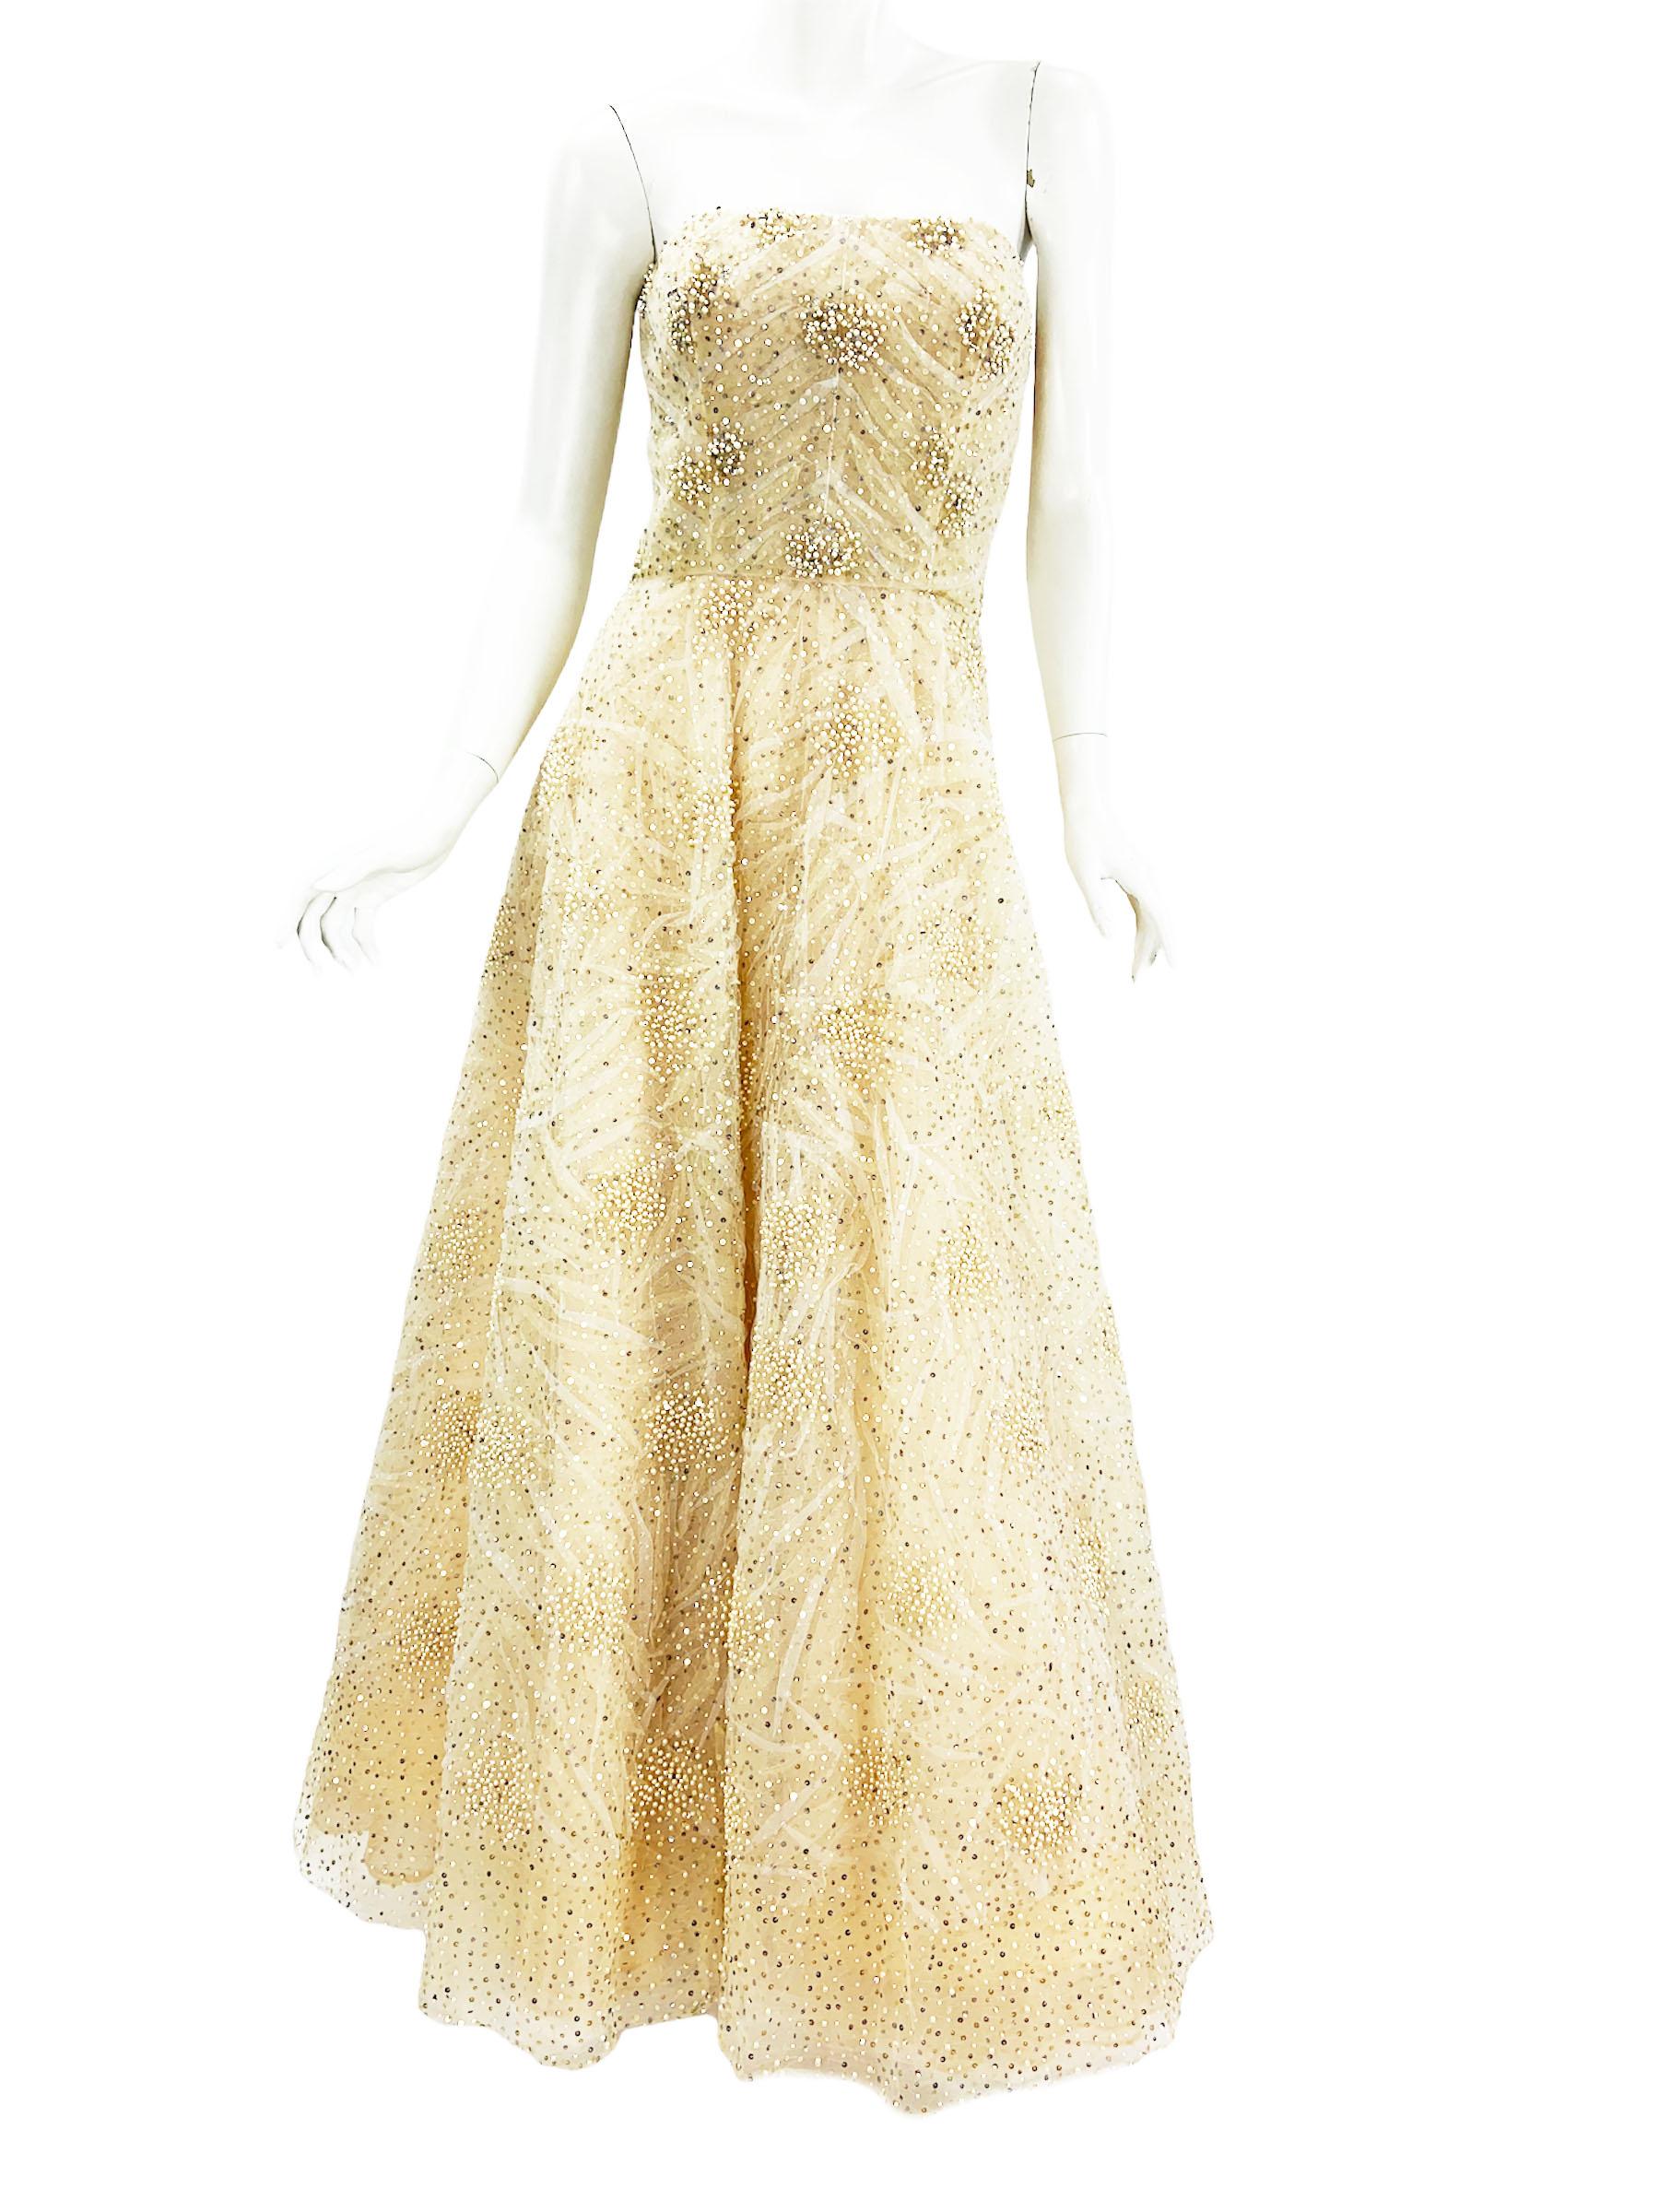 New Oscar De La Renta Champagne Tulle Dress Gown
US size - 8
2008 Collection
Double tulle - white on the top of champagne - finished with white pearl-looking round beads and two tone sequins. 
Gown topped by a figure flattering corset. Multiple